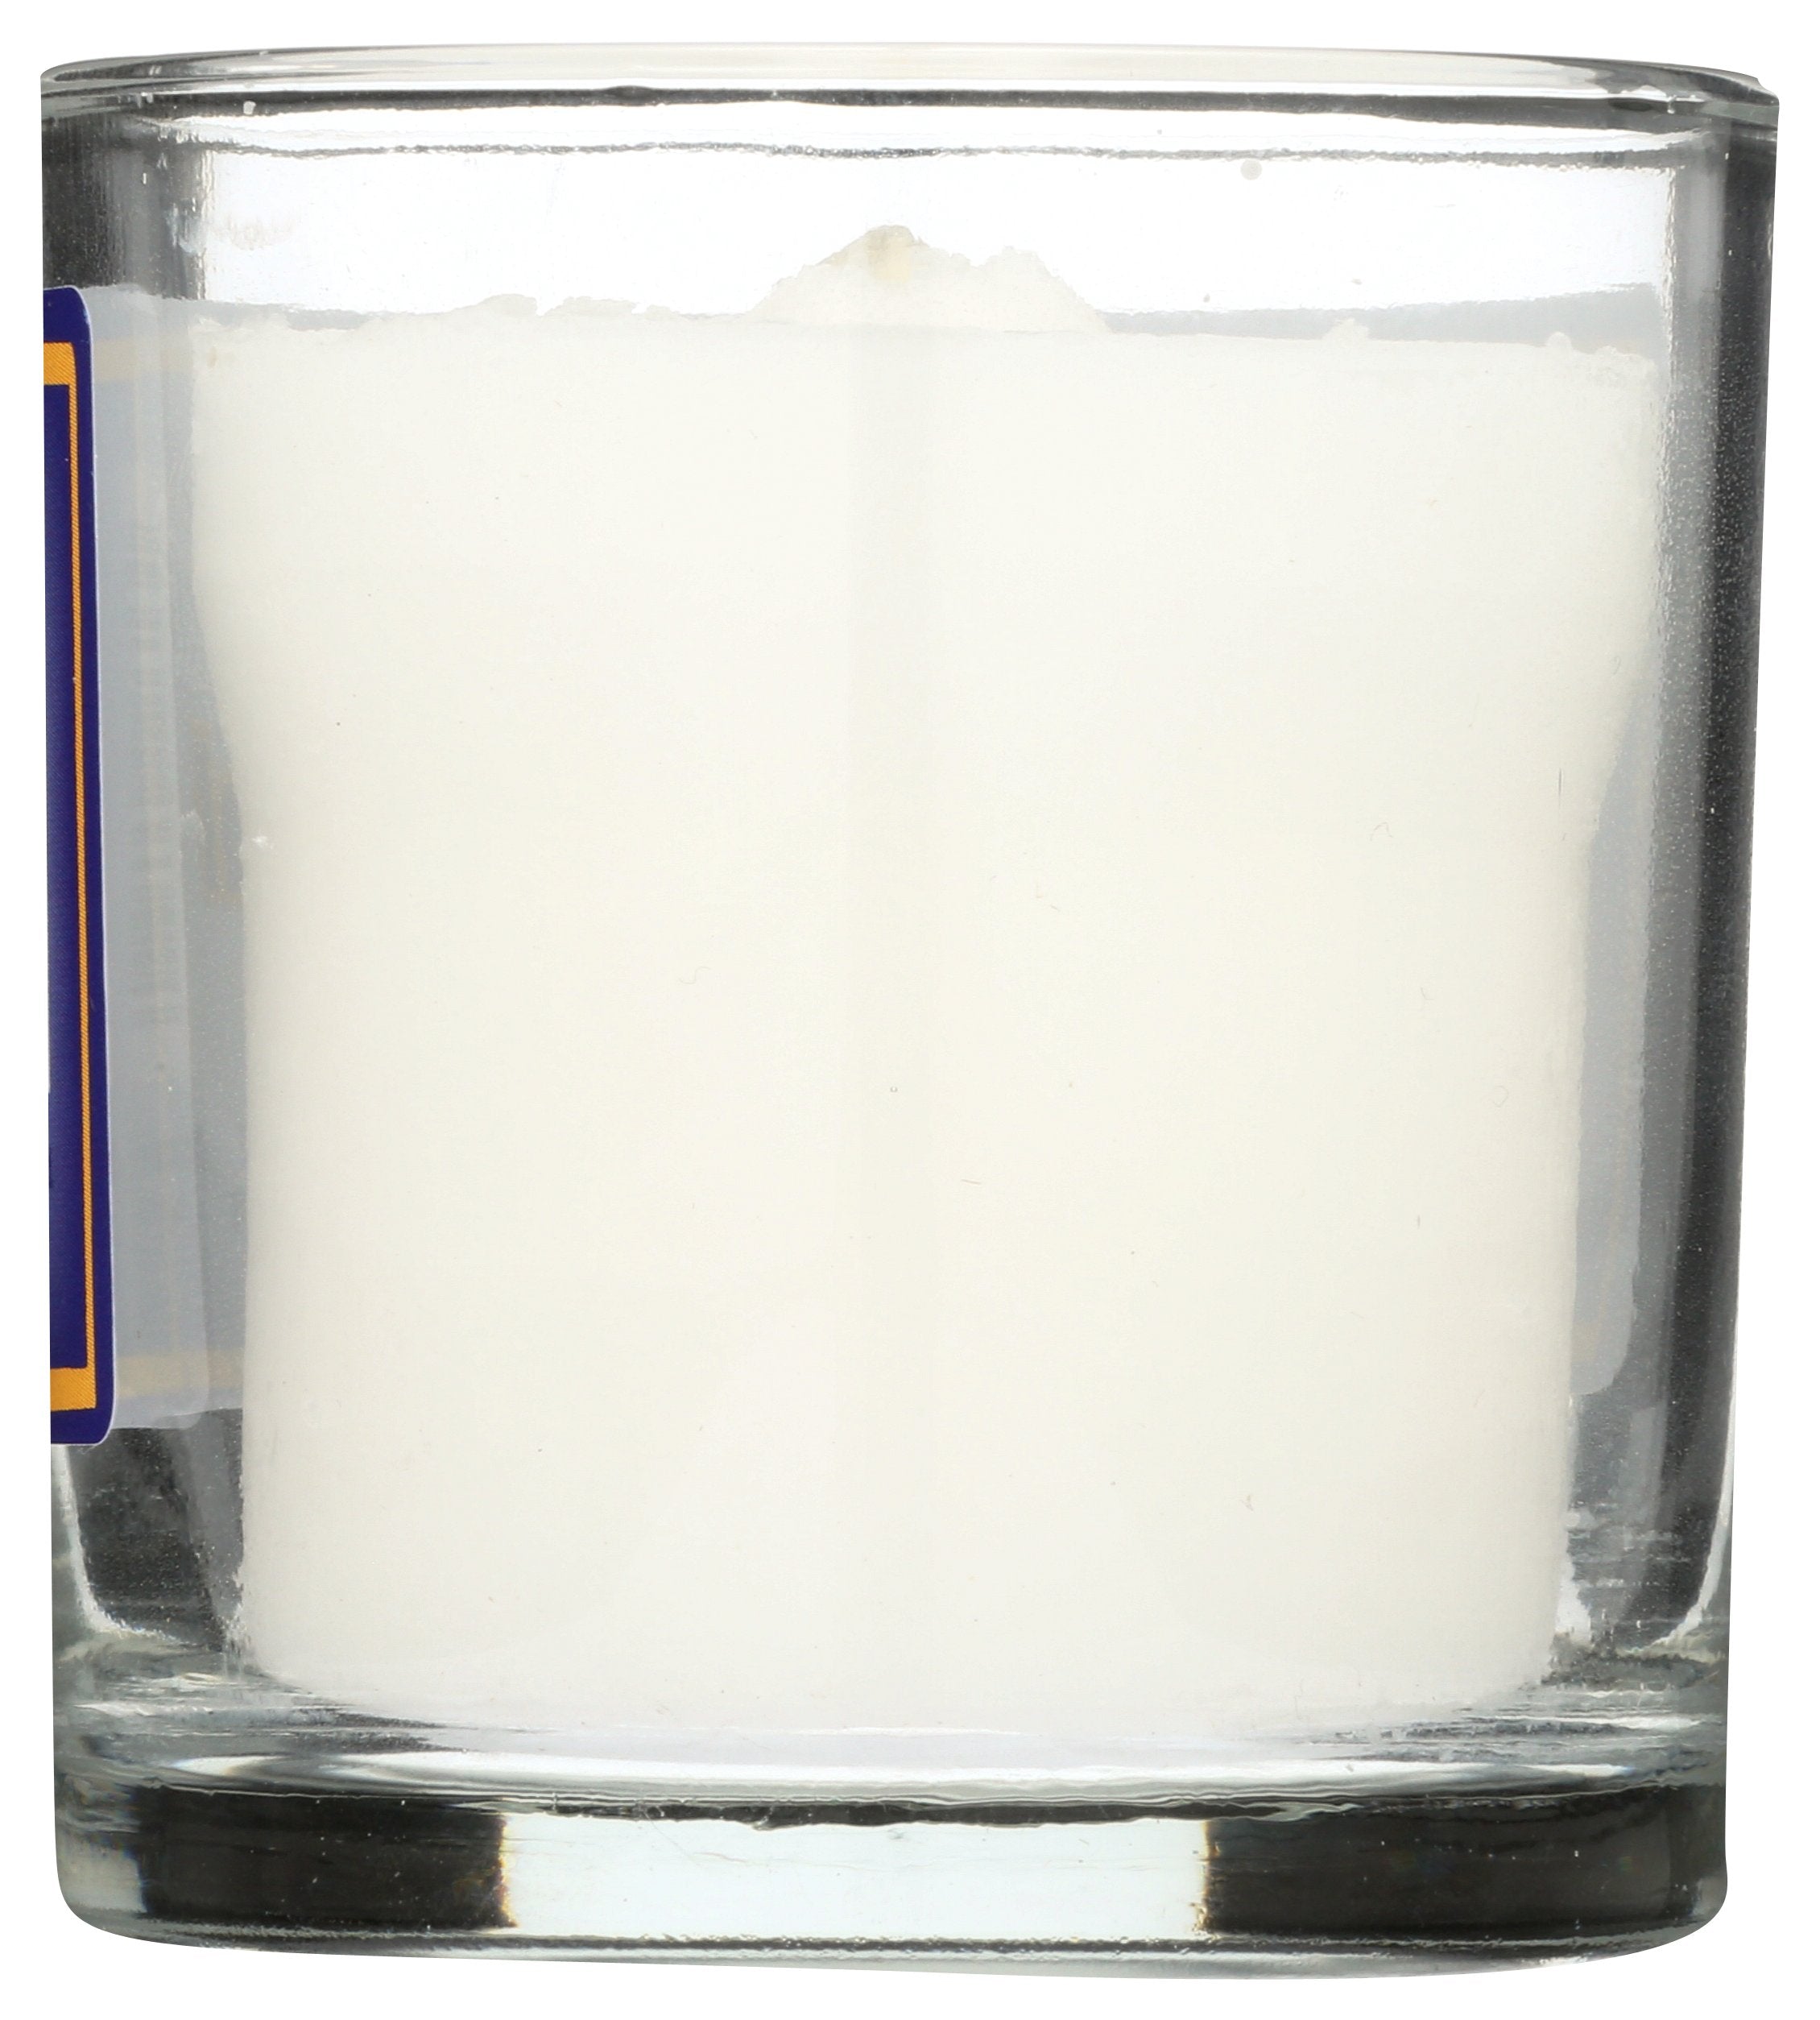 YEHUDA CANDLE TUMBLER GLASS - Case of 24